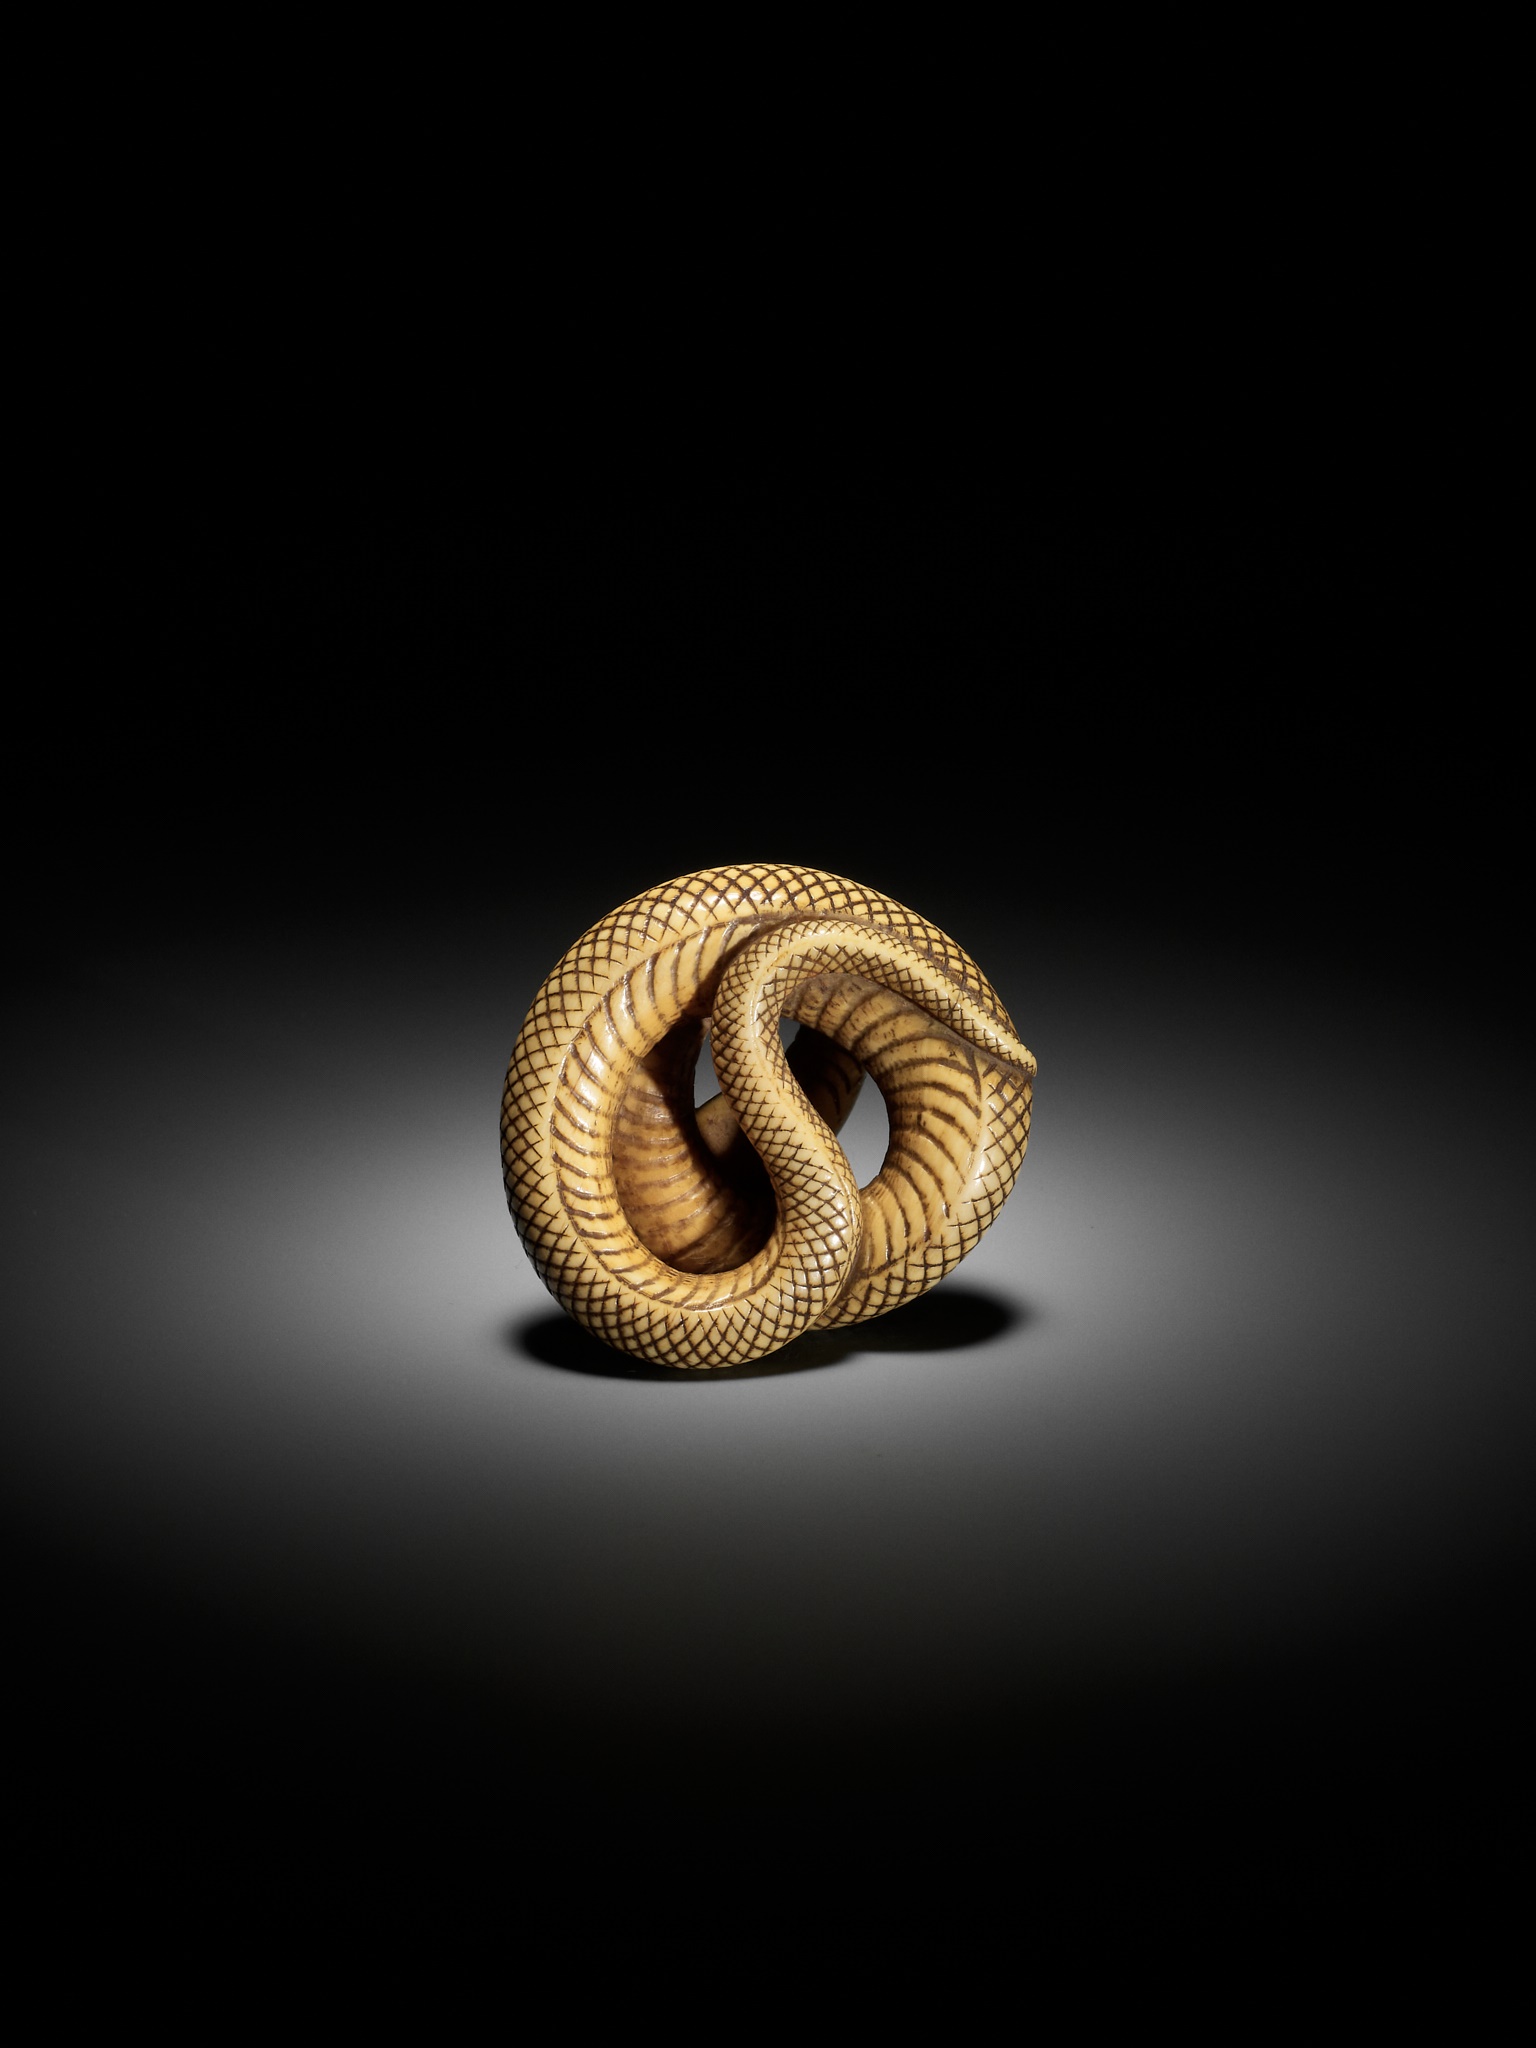 AN IVORY NETSUKE OF A COILED SNAKE, ATTRIBUTED TO OKATOMO - Image 3 of 16